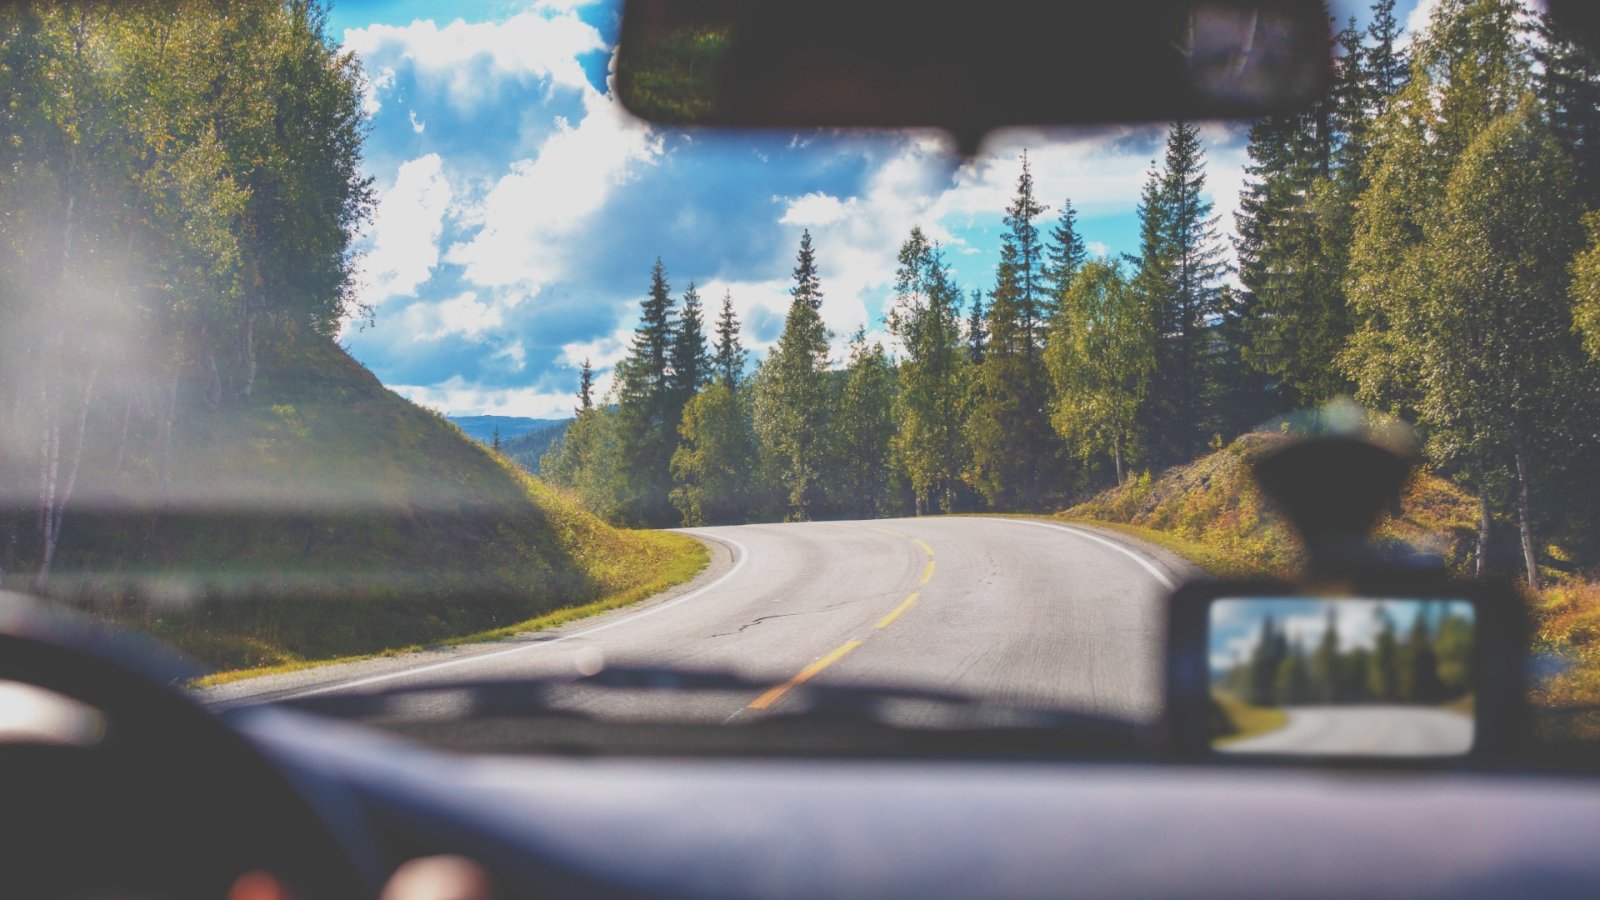 What makes a perfect road-trip car? Here are our tips to get the best one!